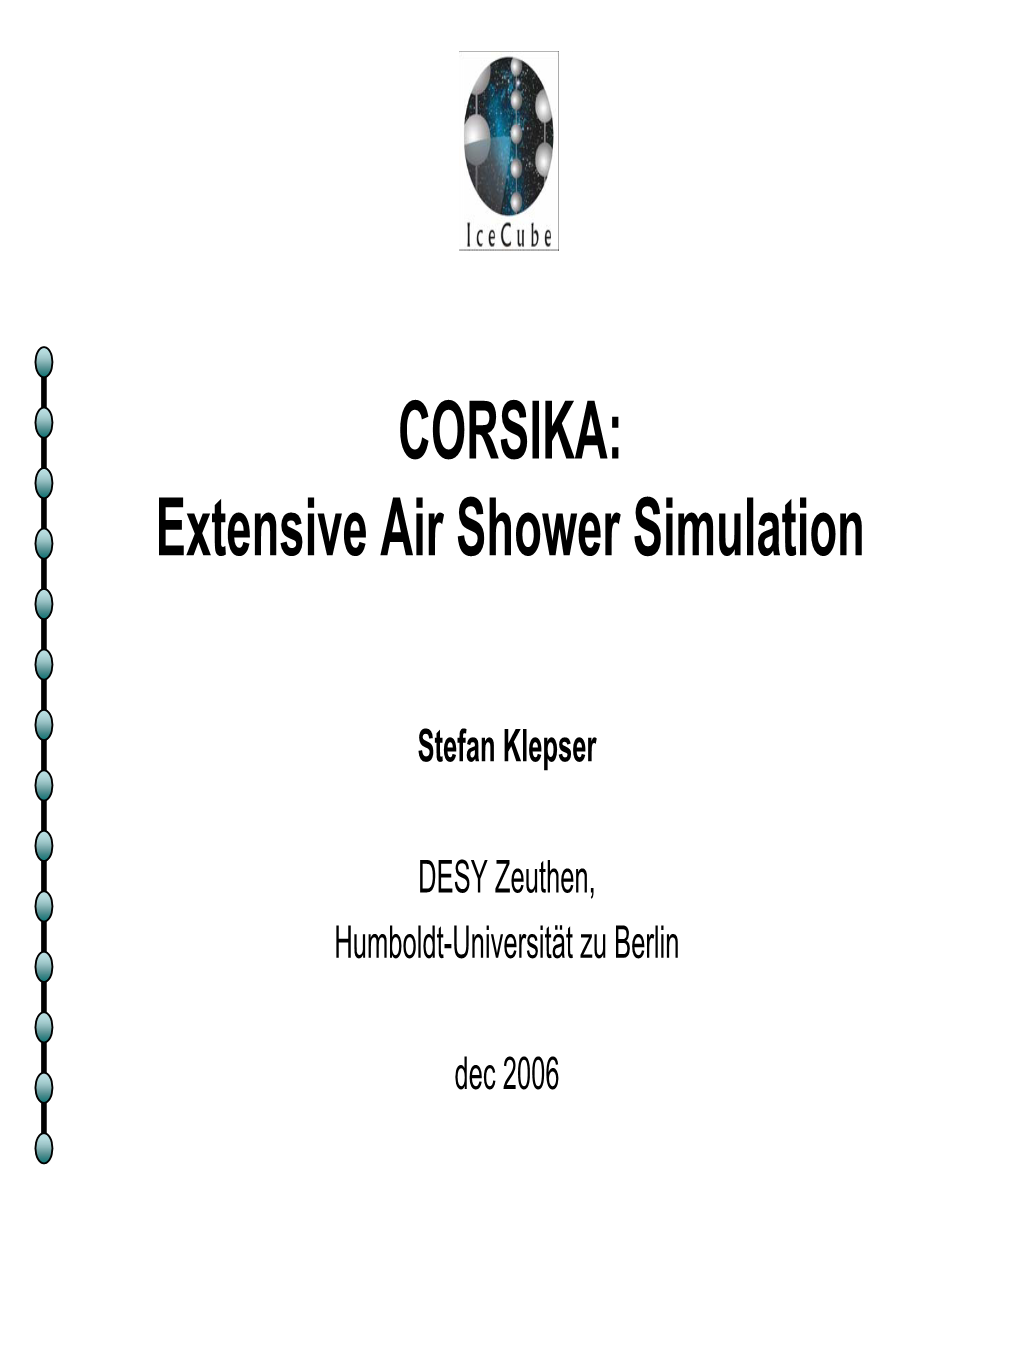 CORSIKA: Extensive Air Shower Simulation